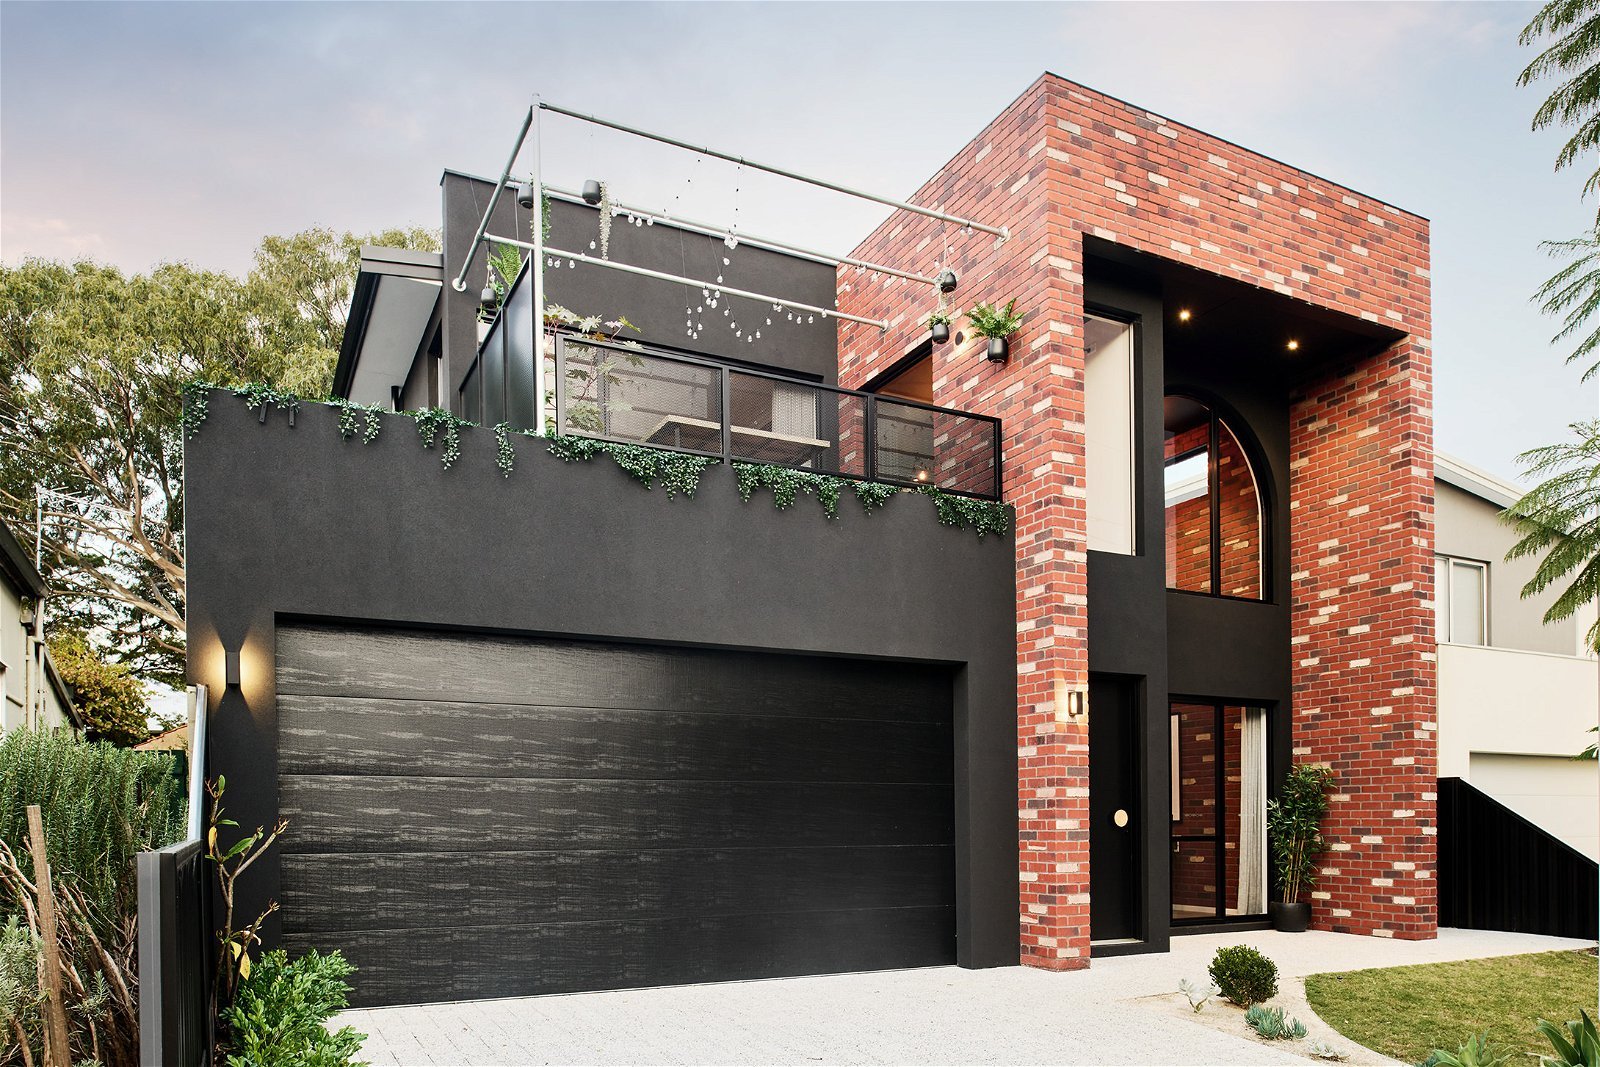 Street view of a two-storey home designed for a Perth residential lot consisting of industrial architectural style and brickwork finish.